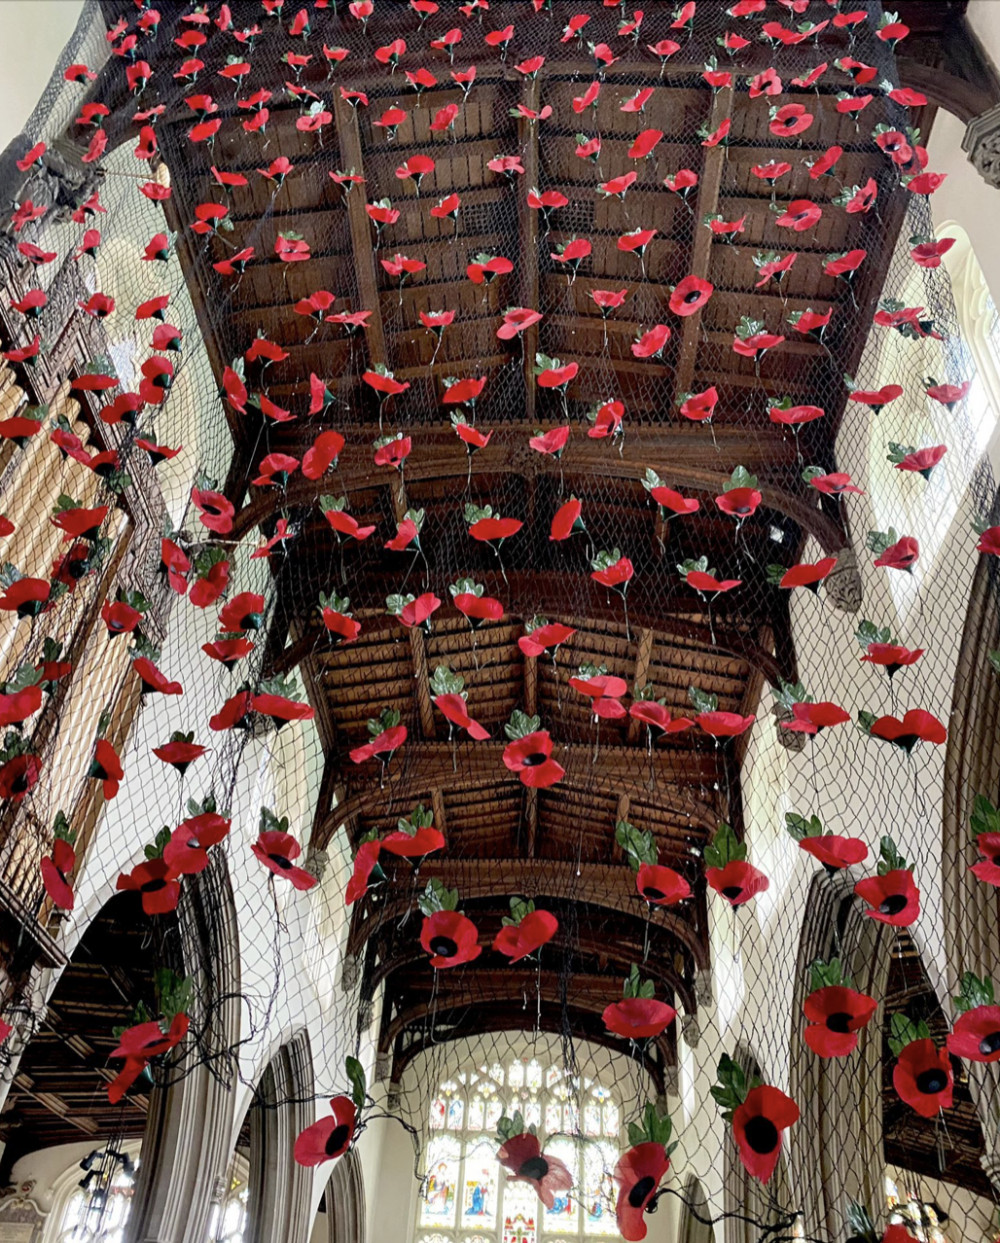 St Mary’s held a Parish Civic Service for Remembrance Sunday. PICTURE: The inside of St Mary's Church, Hitchin. CREDIT: Margaret Khinmaung 